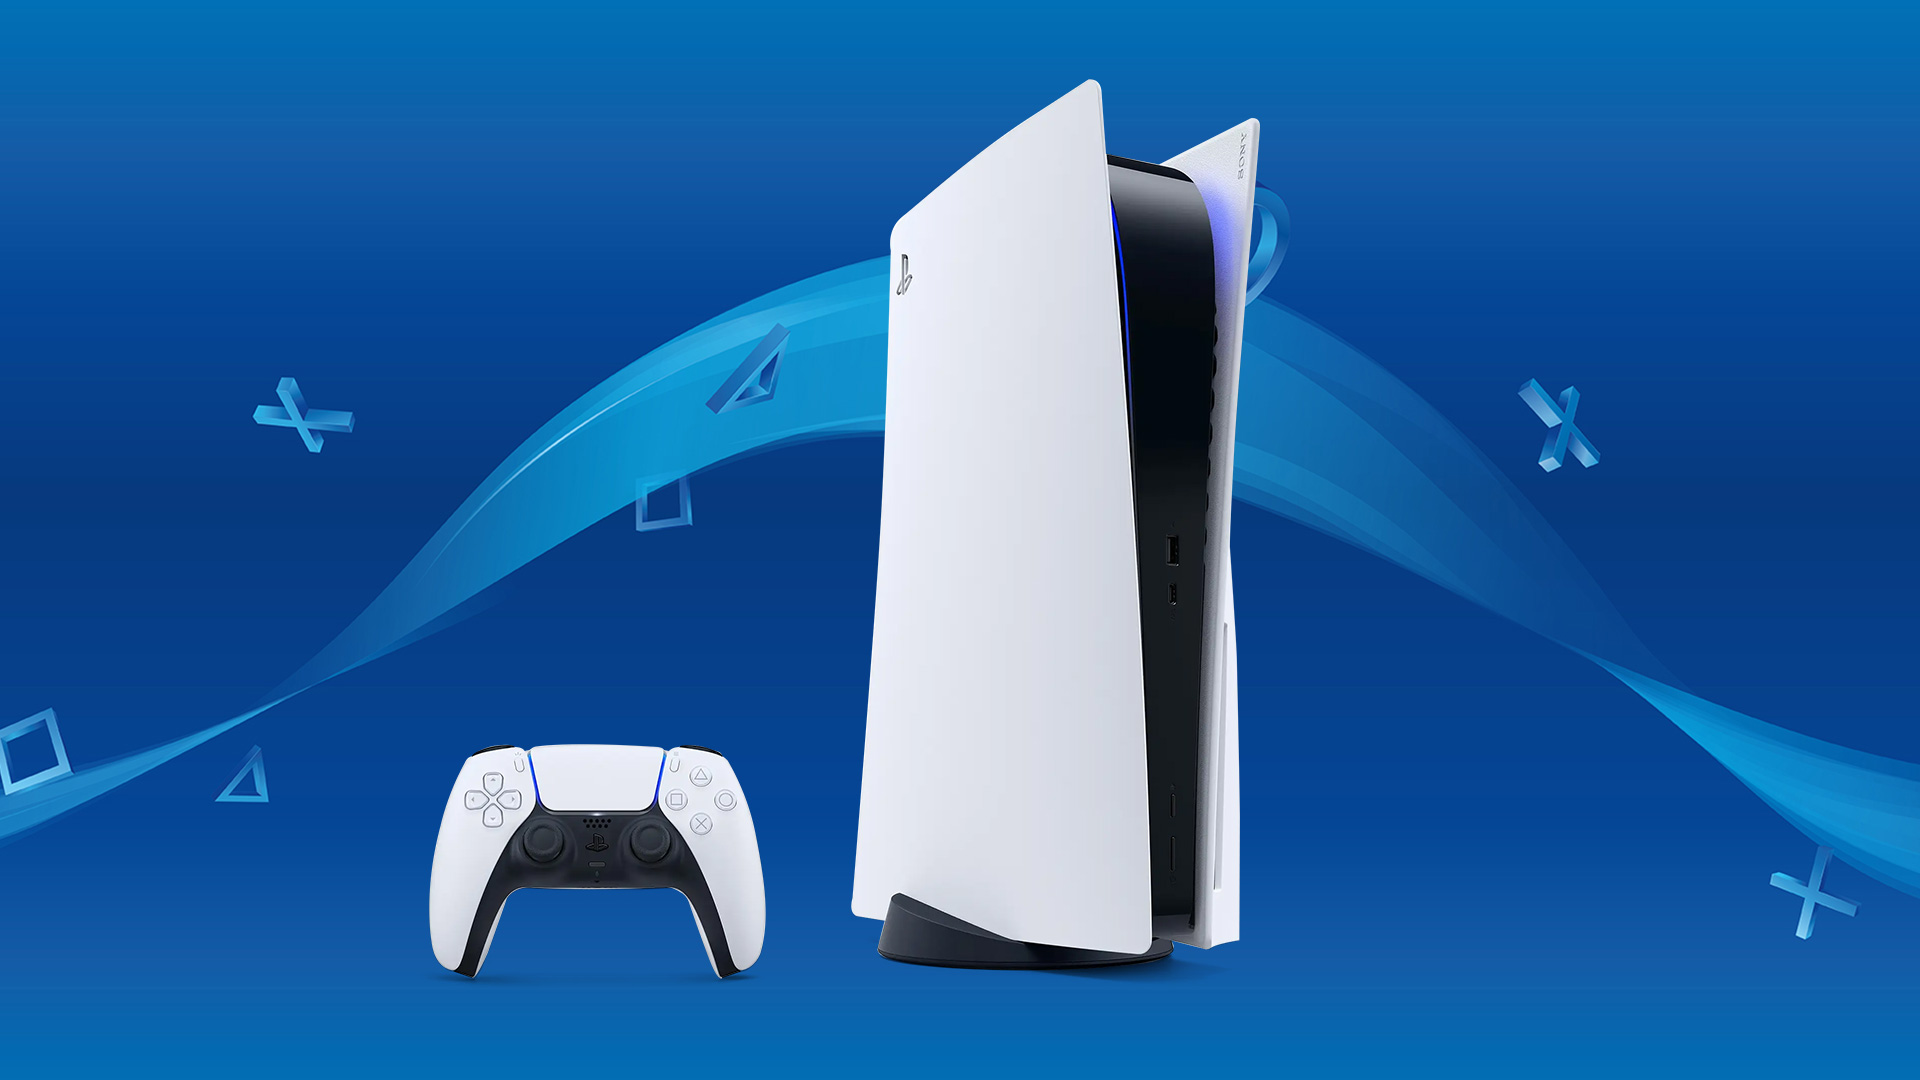 Get in the game with $130 off the limited-time PlayStation 5 Slim